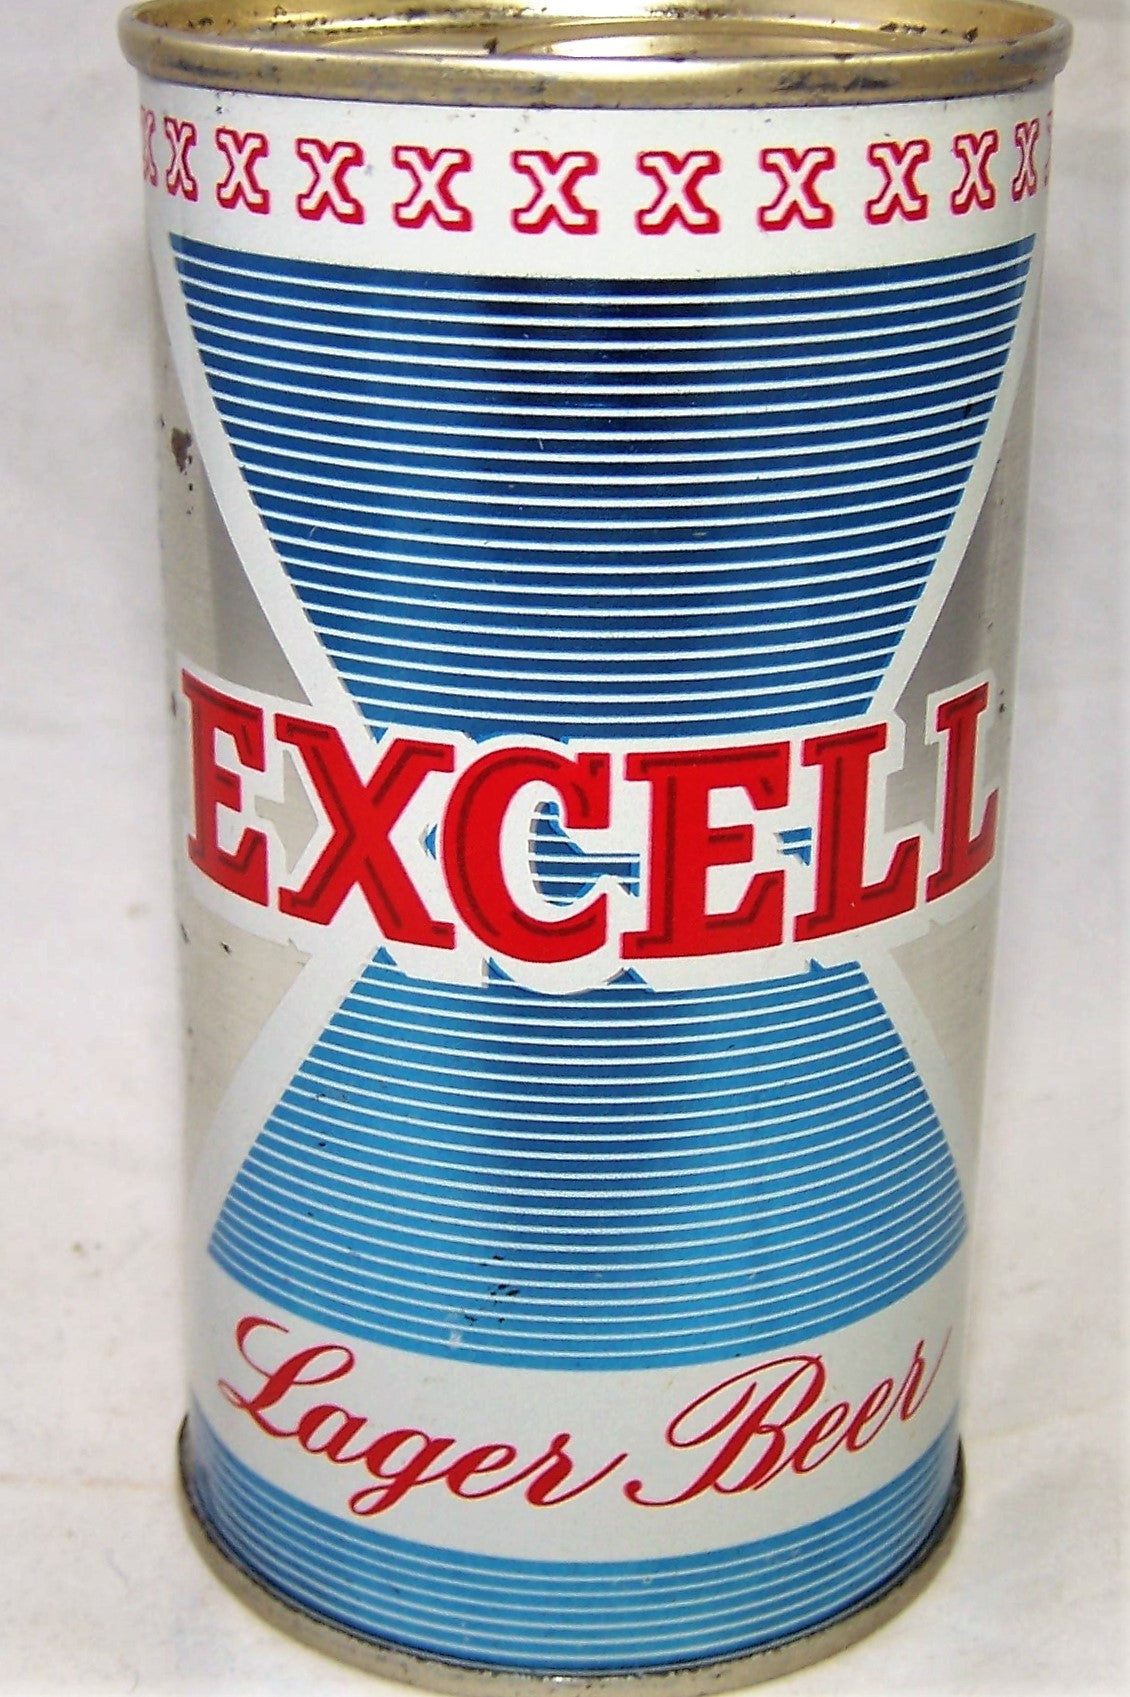 Excell Lager Beer, USBC 61-19, Grade 1 Sold On 10/23/19